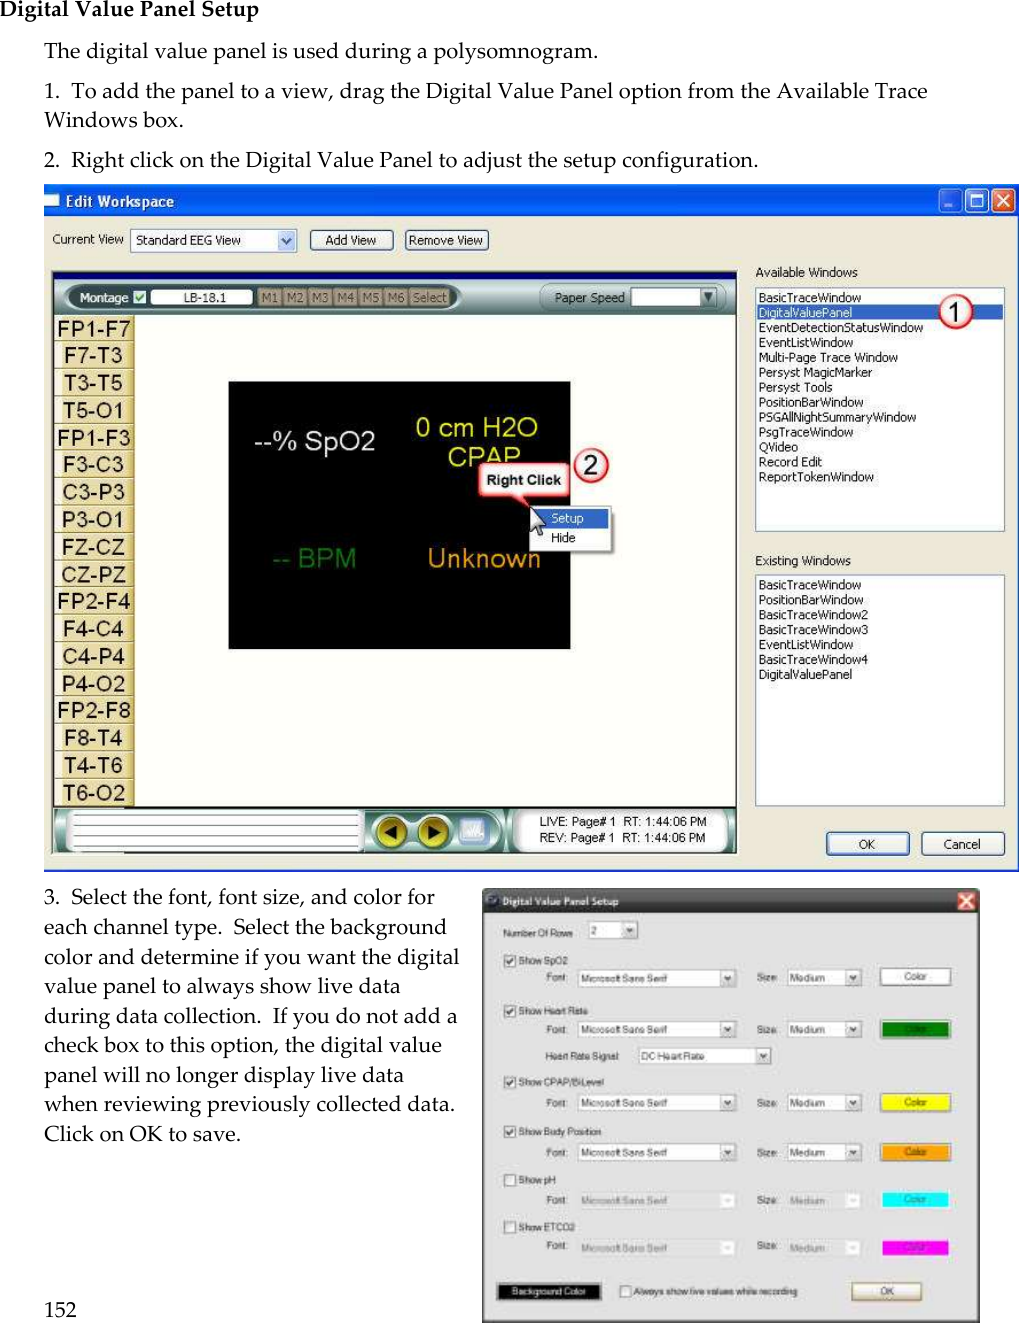 152   Digital Value Panel Setup The digital value panel is used during a polysomnogram.   1.  To add the panel to a view, drag the Digital Value Panel option from the Available Trace Windows box. 2.  Right click on the Digital Value Panel to adjust the setup configuration.  3.  Select the font, font size, and color for each channel type.  Select the background color and determine if you want the digital value panel to always show live data during data collection.  If you do not add a check box to this option, the digital value panel will no longer display live data when reviewing previously collected data.  Click on OK to save. 